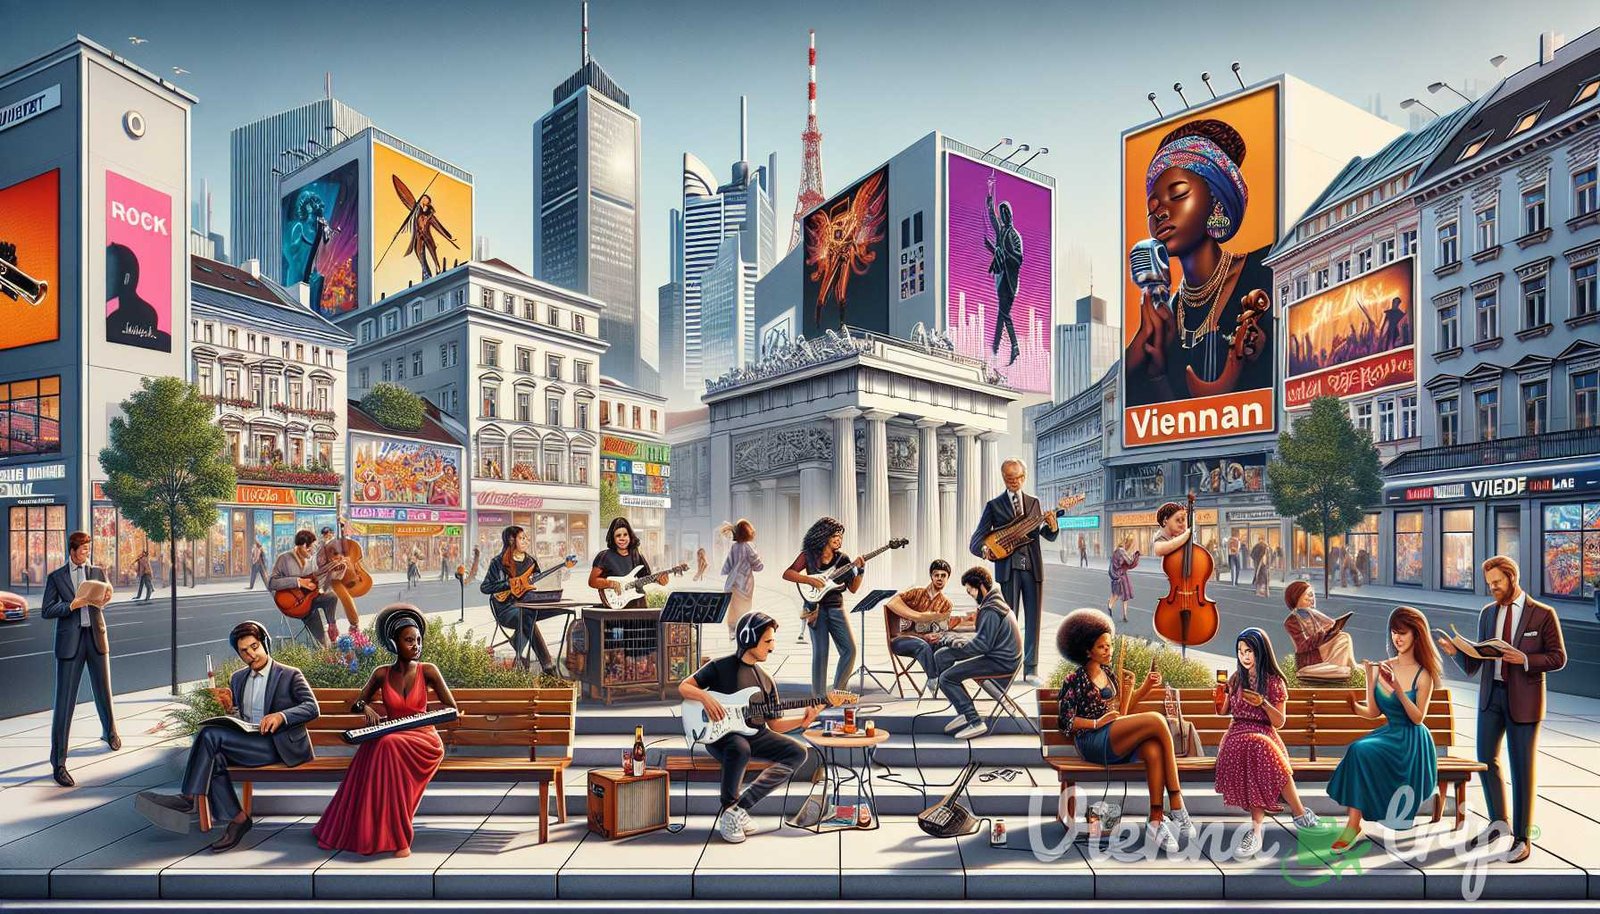 Illustration for section: 3. Contemporary Music: In recent decades, Vienna has embraced a more contemporary and eclectic music - vienna melodies